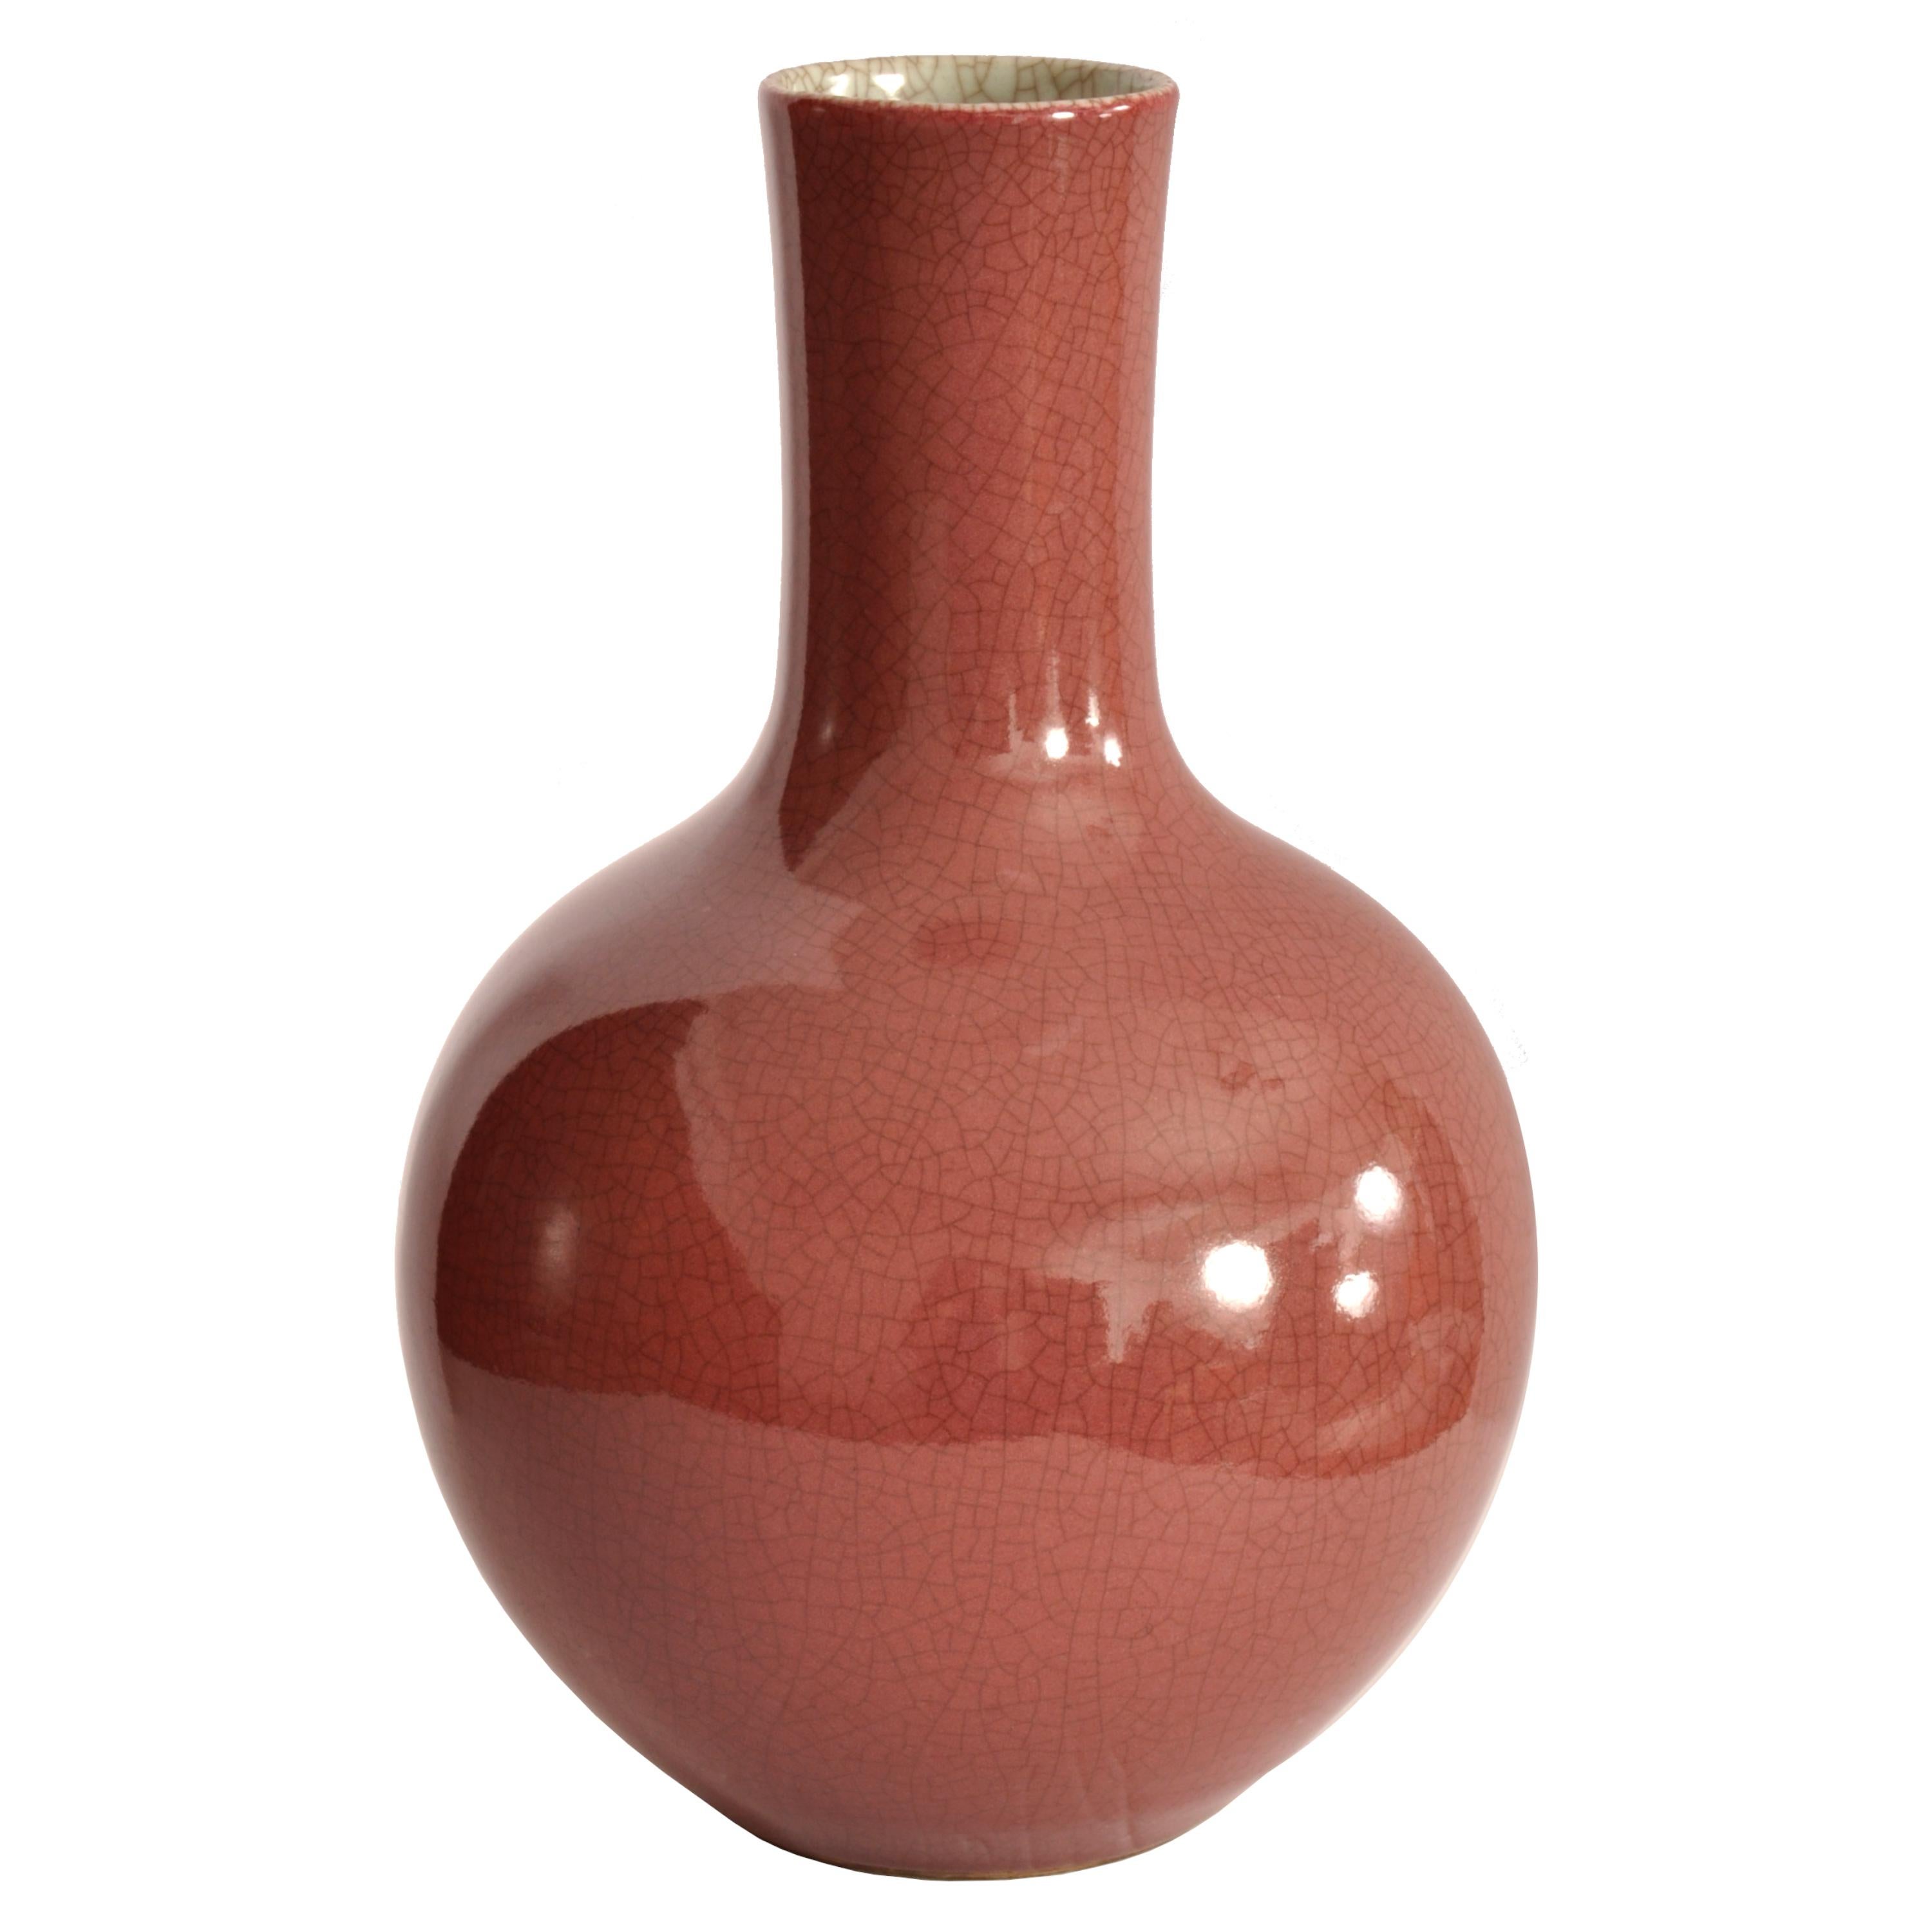 Antique Chinese Qing dynasty (1644-1911) late 19th century bottle vase.
The vase with a red crackle glaze to the outisde and a cream crackle glaze to the interior. The vase of bottle form with a large bulbous globular base and a tapering neck with a